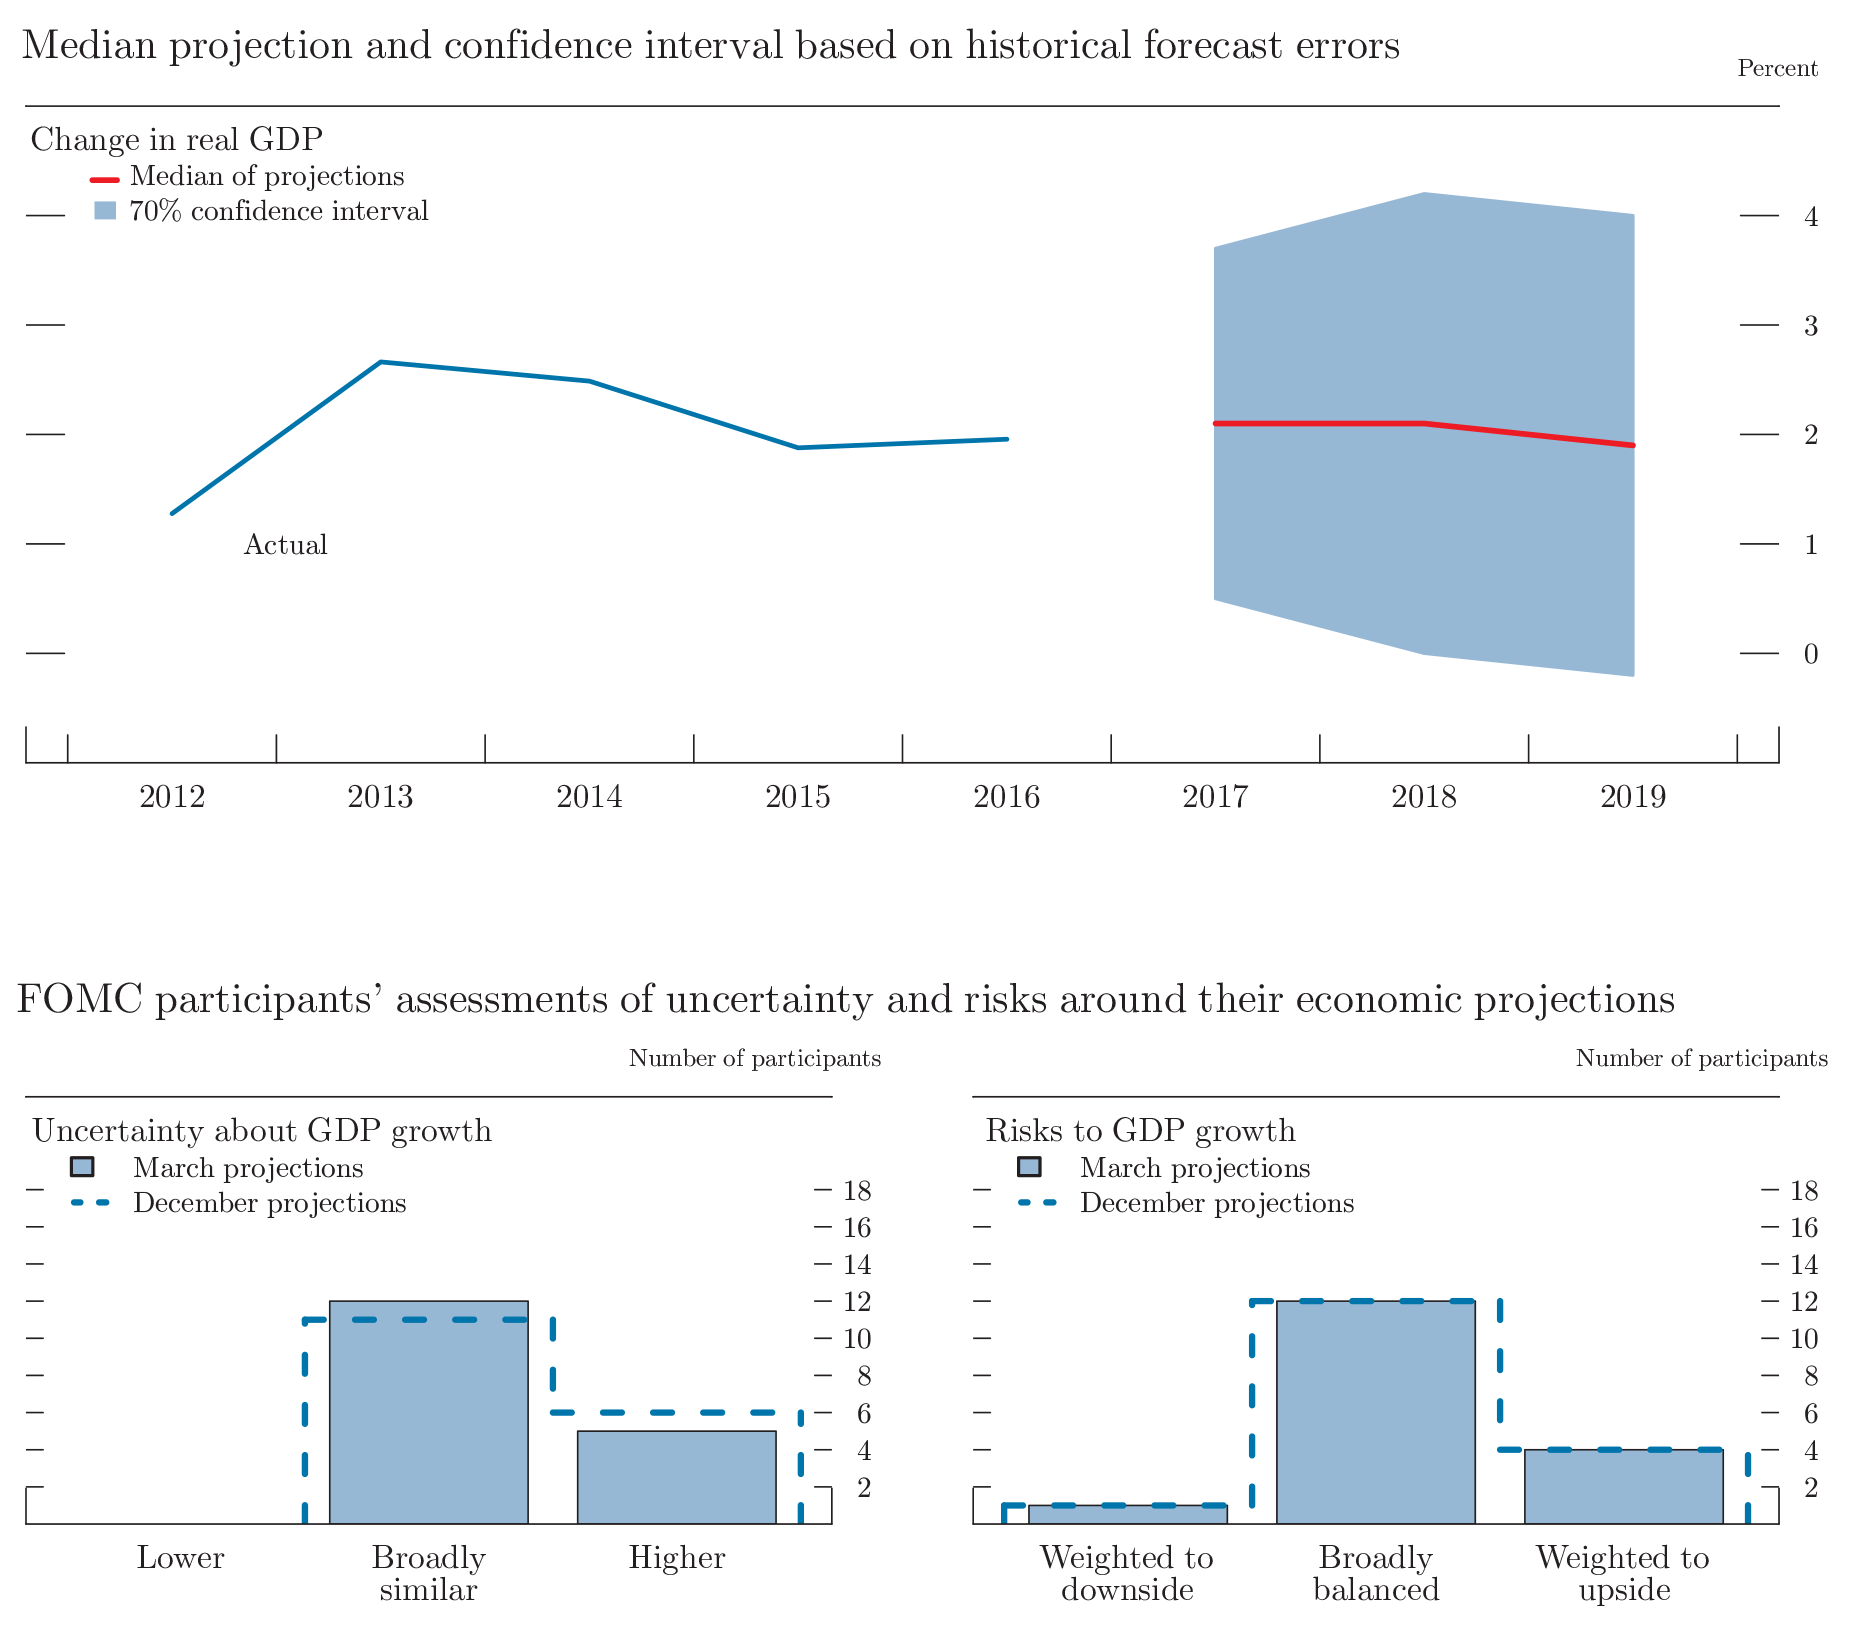 Figure 4.A. Uncertainty and risks in projections of GDP growth. See accesible link for data.